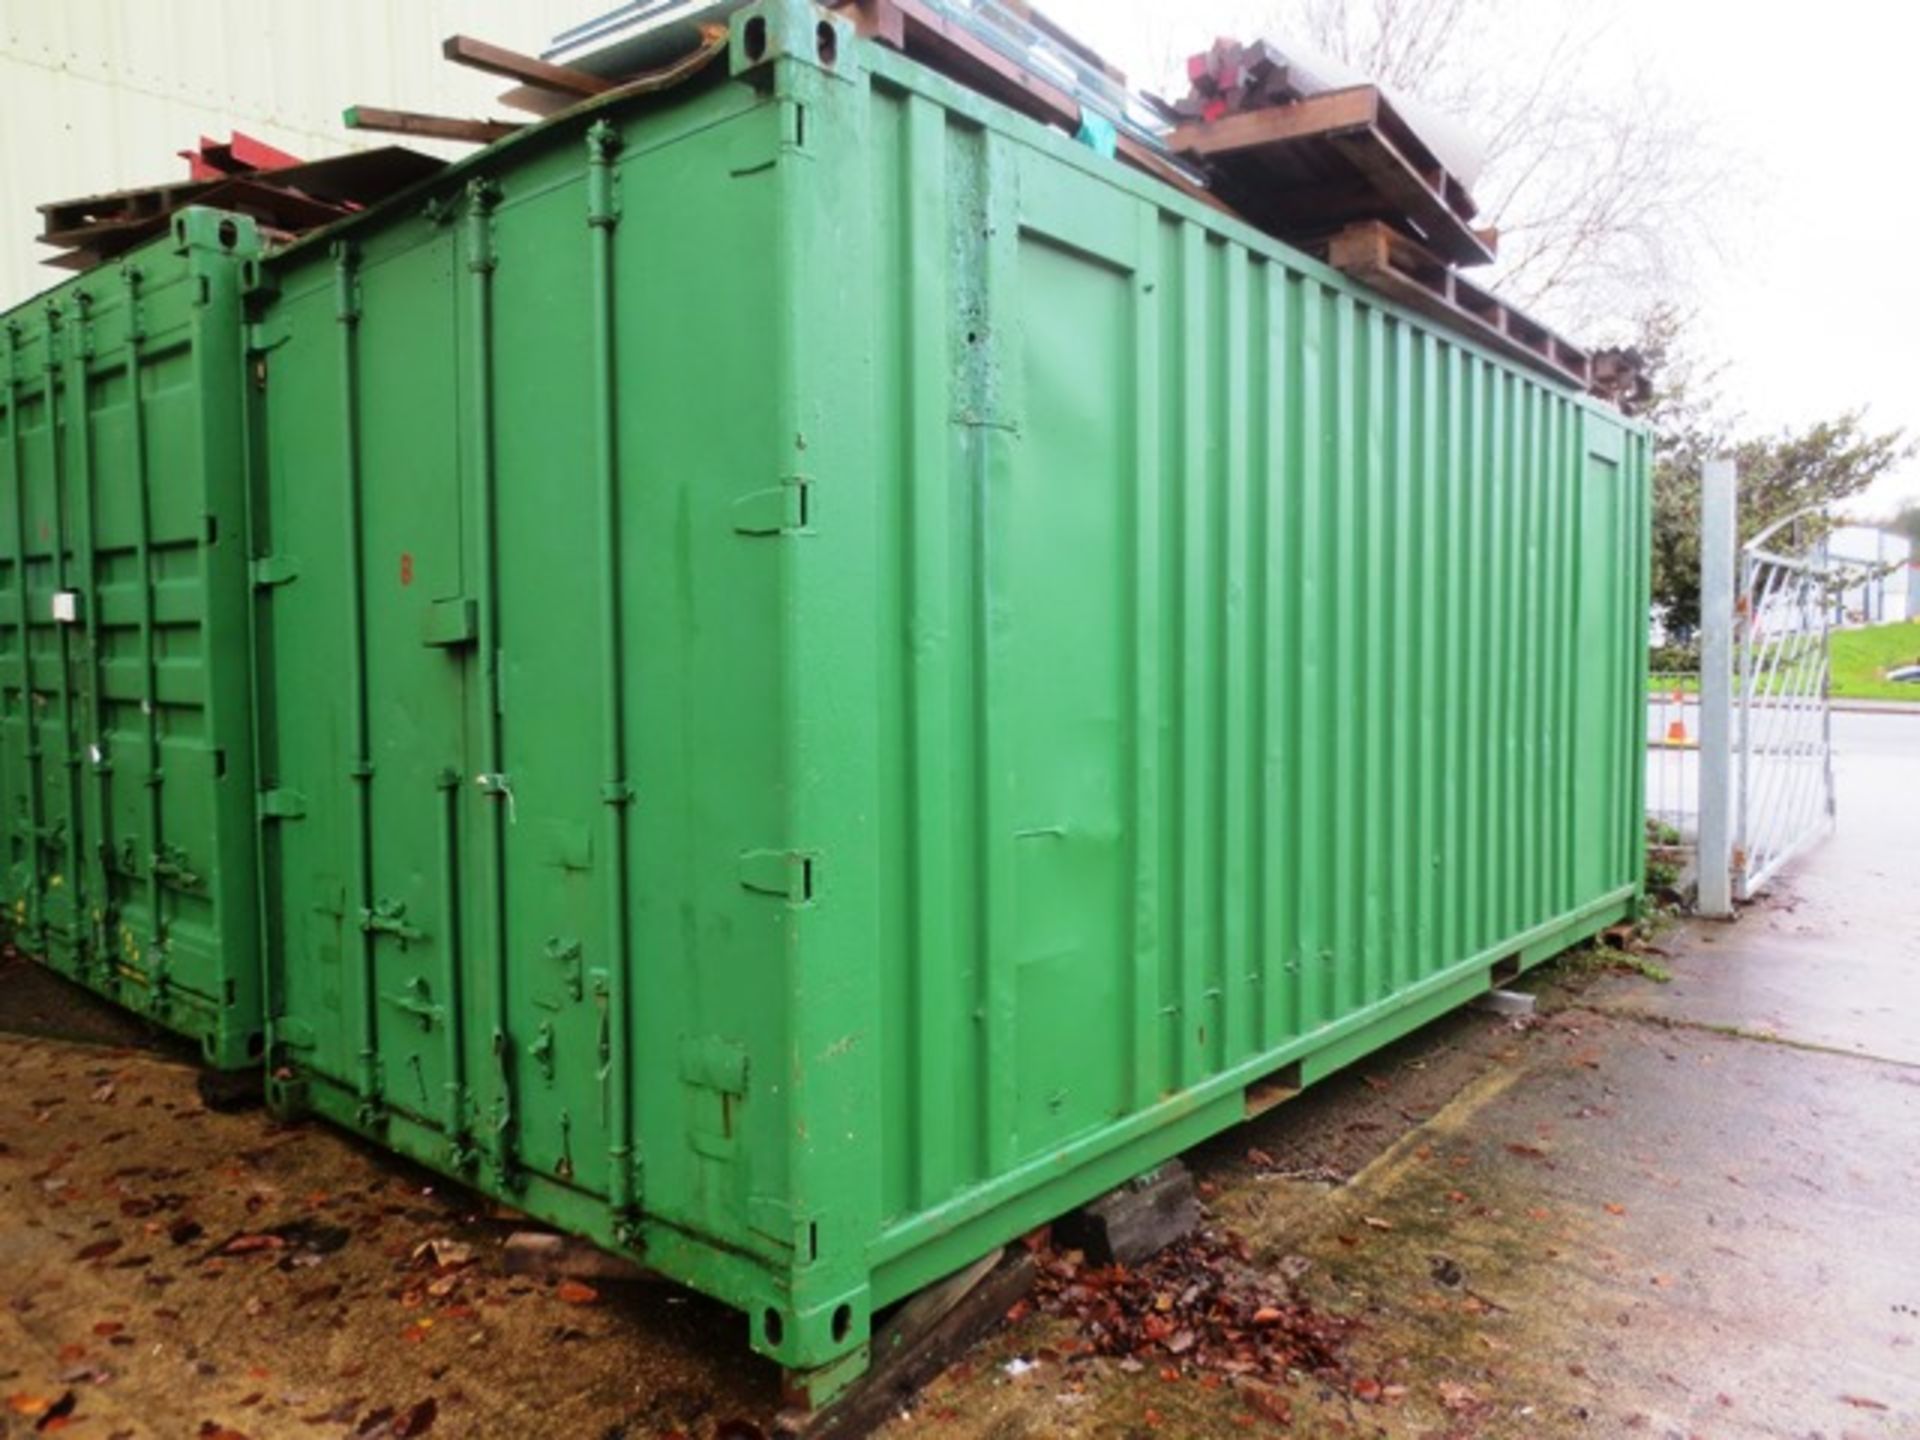 20ft steel shipping type container (excluding contents) (No. B) (Please note: A work Method